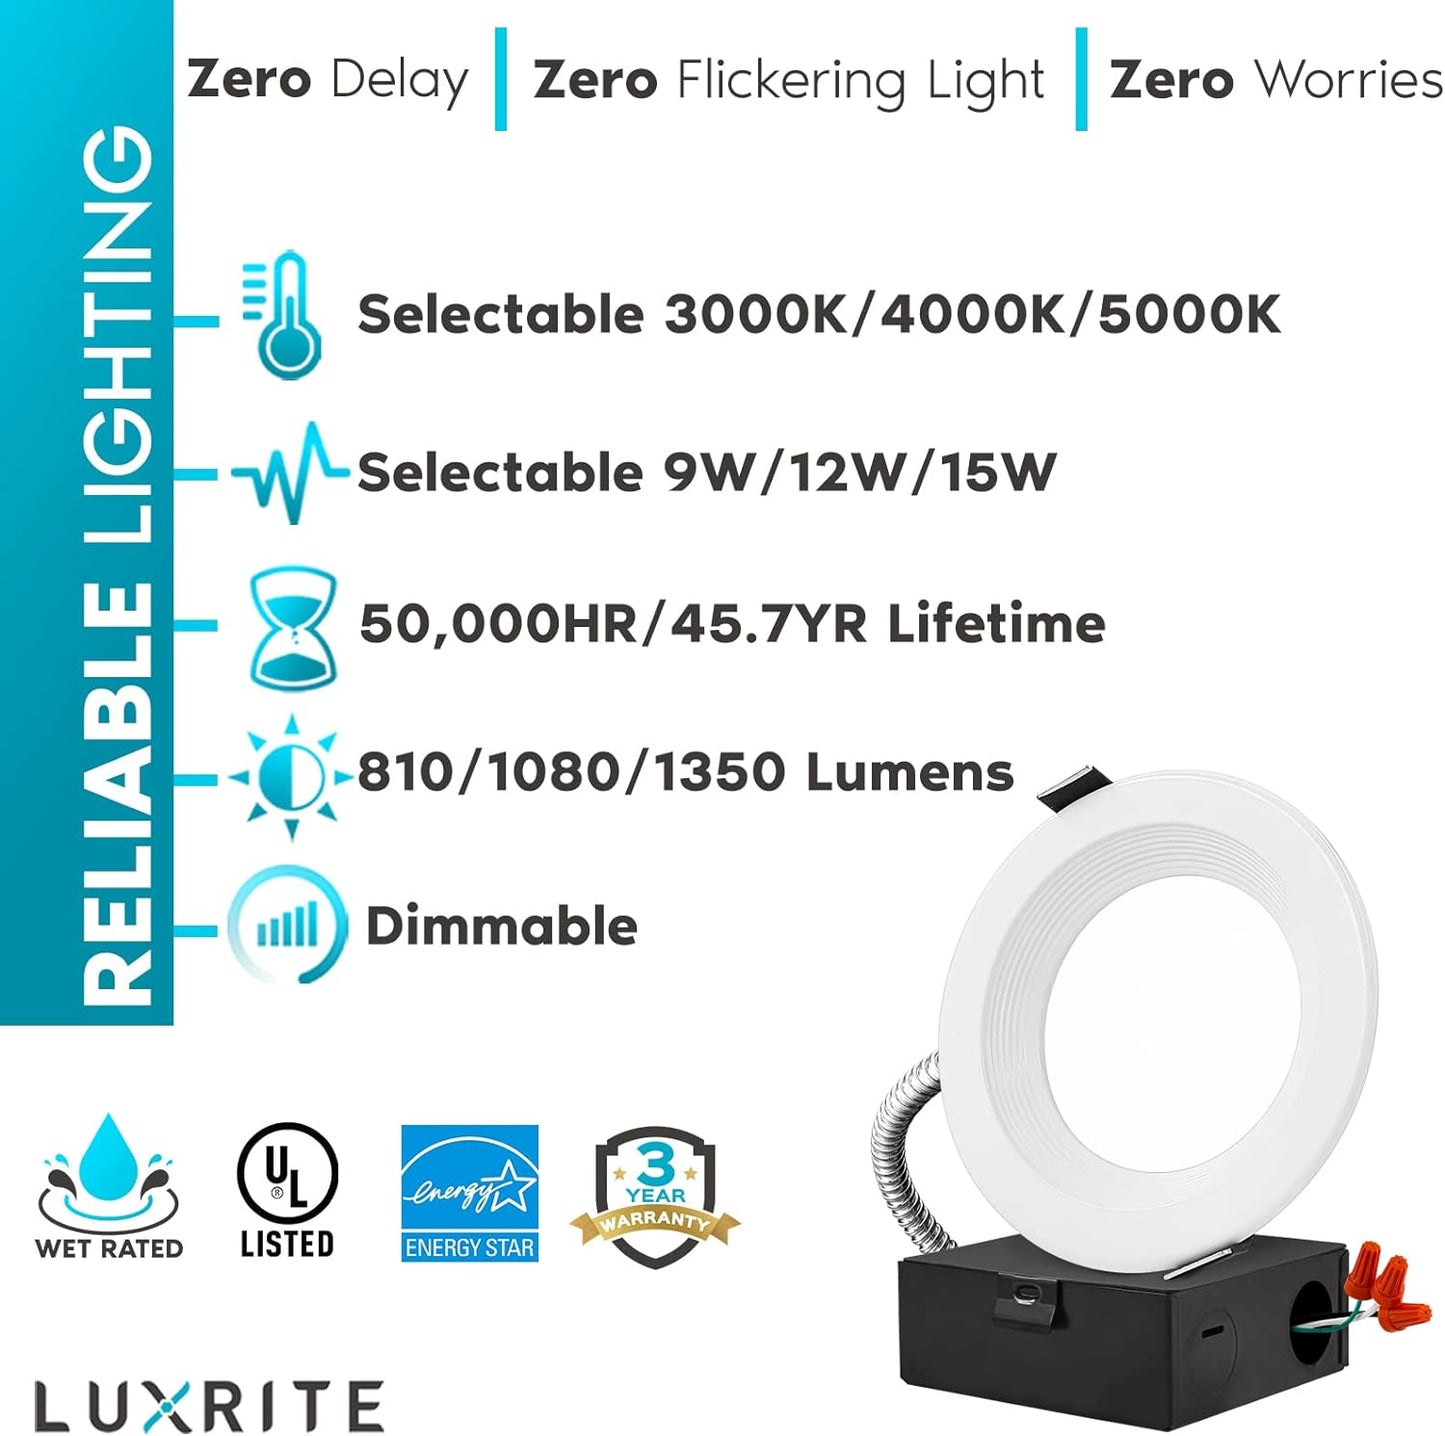 LUXRITE 4 Inch Commercial LED Recessed Light with J-Box, 9/12/15W, 3 Color Selectable 3000K-5000K, 810/1080/1350 Lumens, 0-10V Dimmable, 120-277V, Canless LED Downlight, IC Rated, Wet